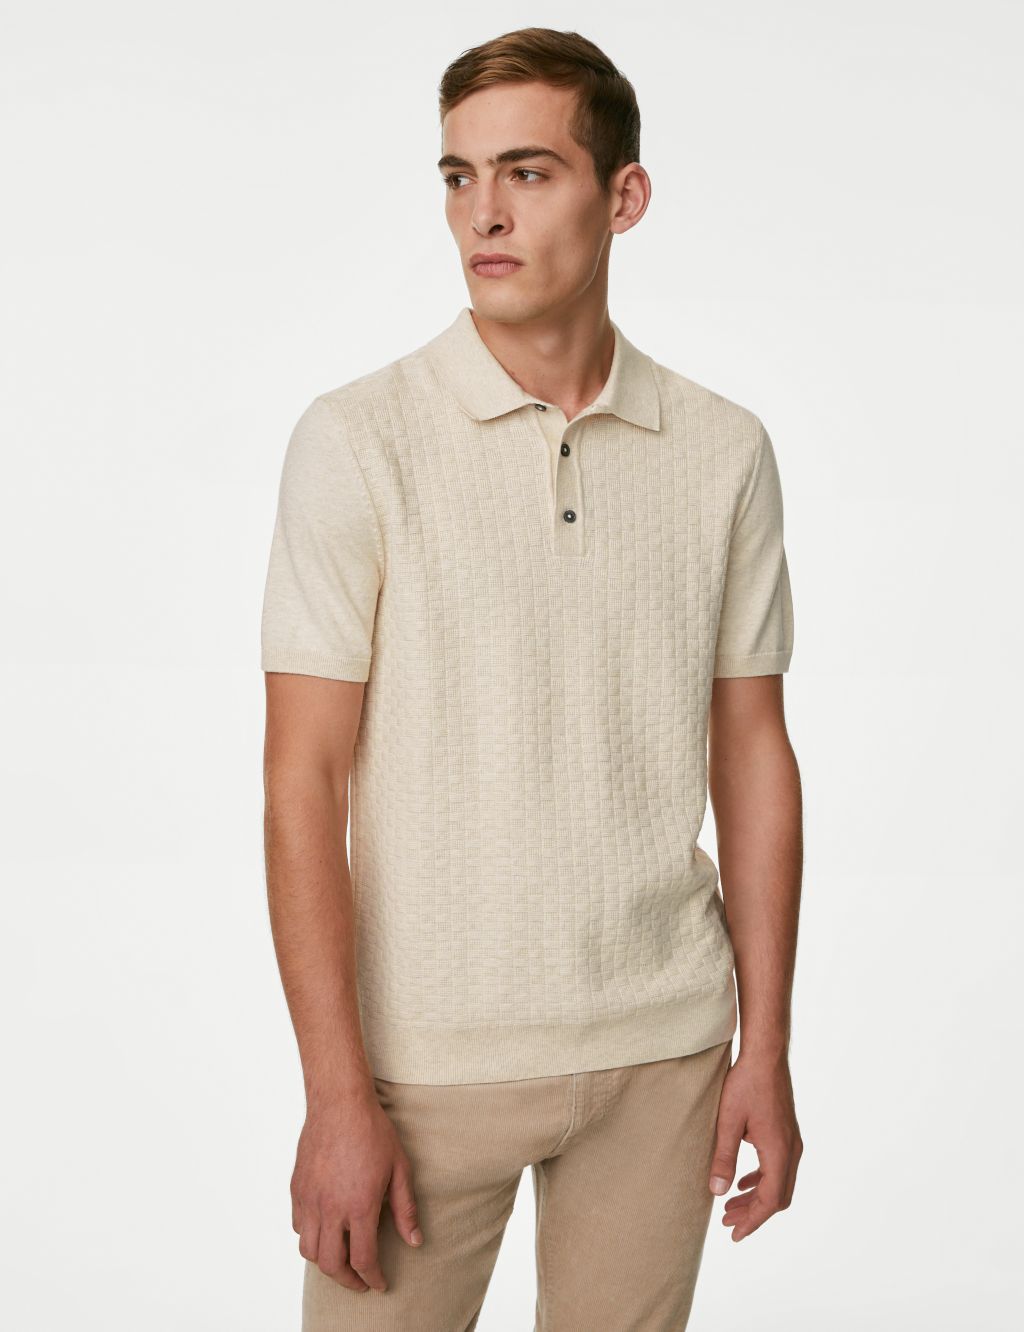 Cotton Rich Textured Knitted Polo Shirt image 3